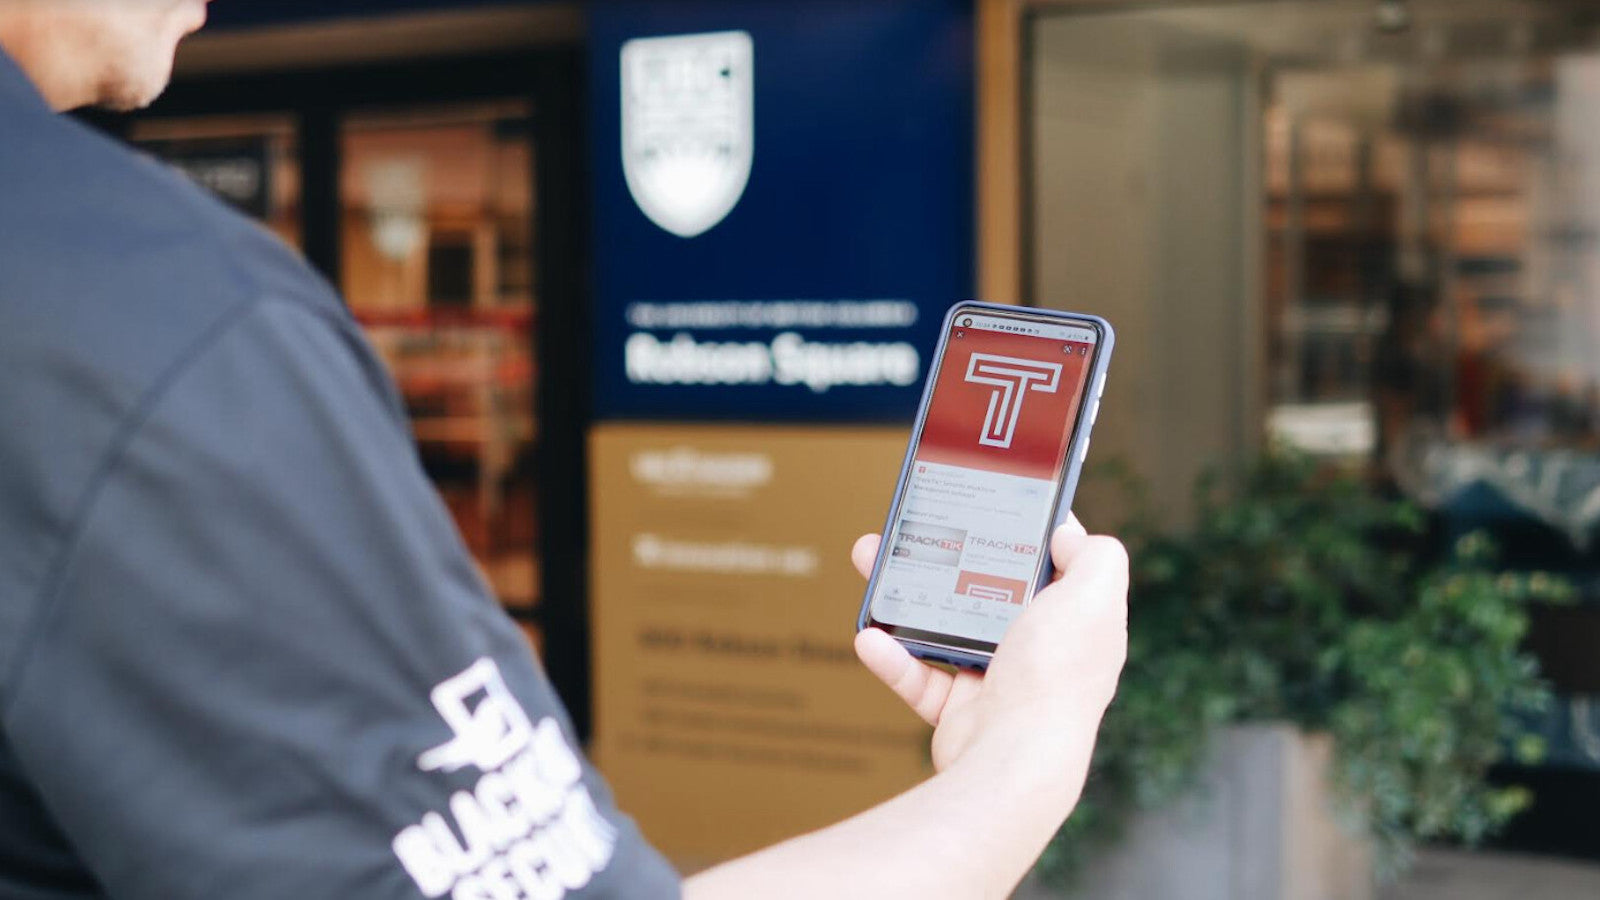 Close up of security guard holding a mobile device showing Tracktik technology on the screen